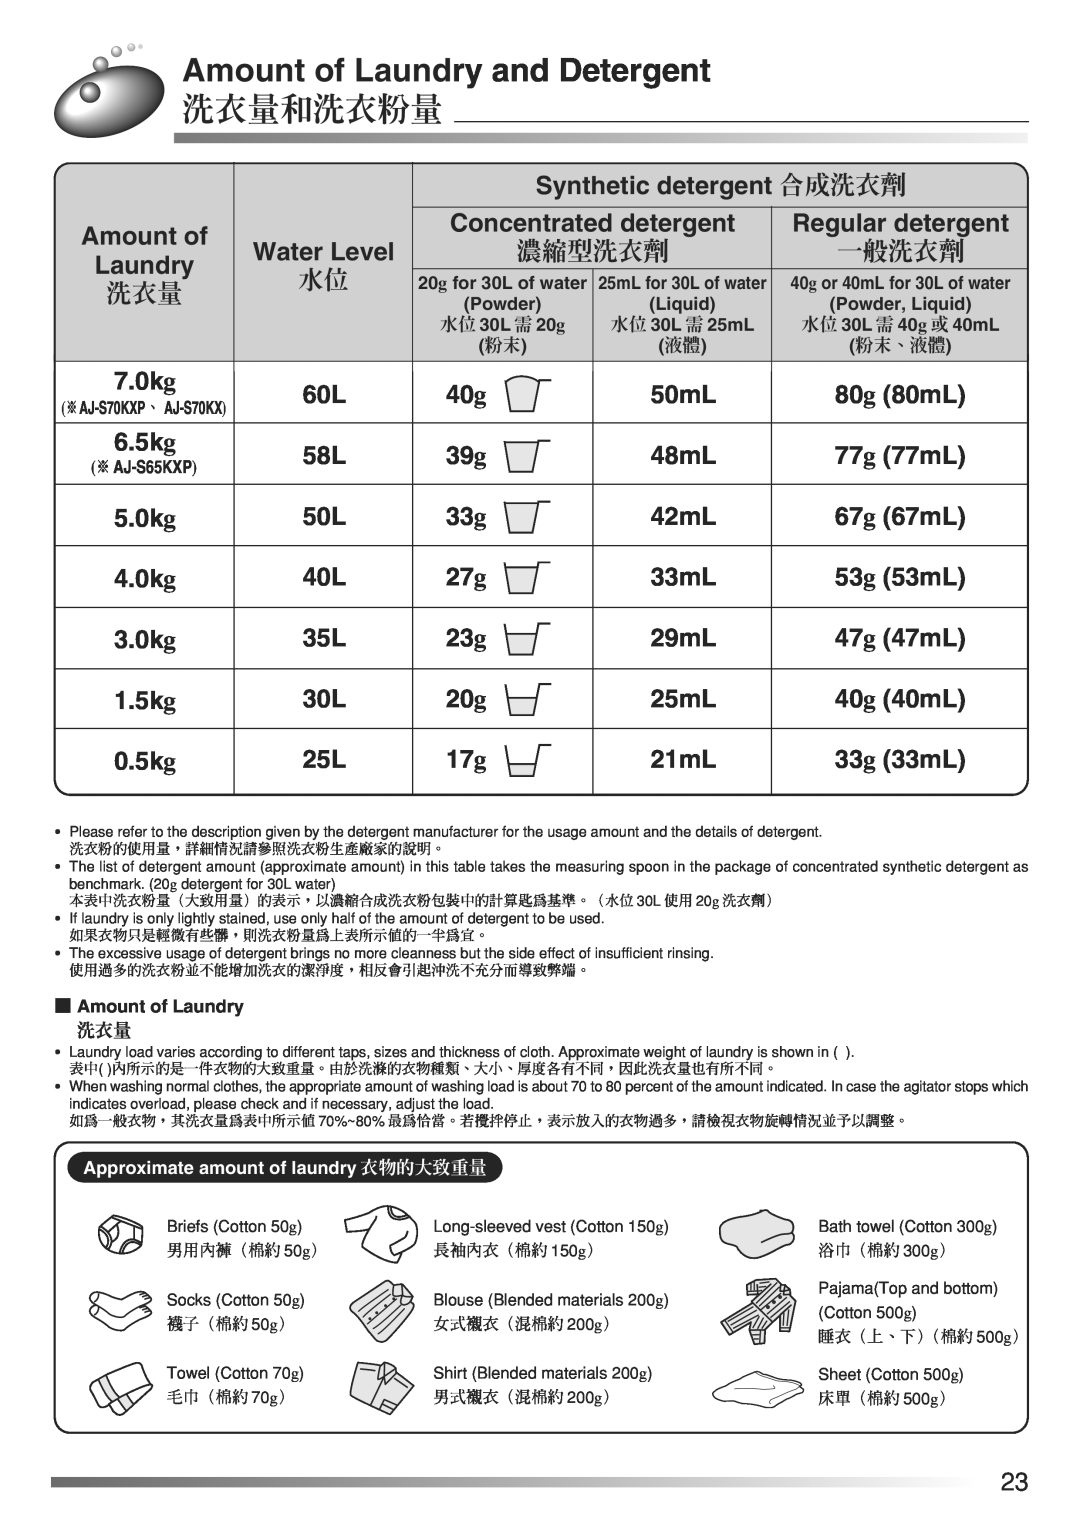 Hitachi AJ-S70KX Amount of Laundry and Detergent, 洗衣量和洗衣粉量, Synthetic detergent 合成洗衣劑, Concentrated detergent, 50mL, 48mL 